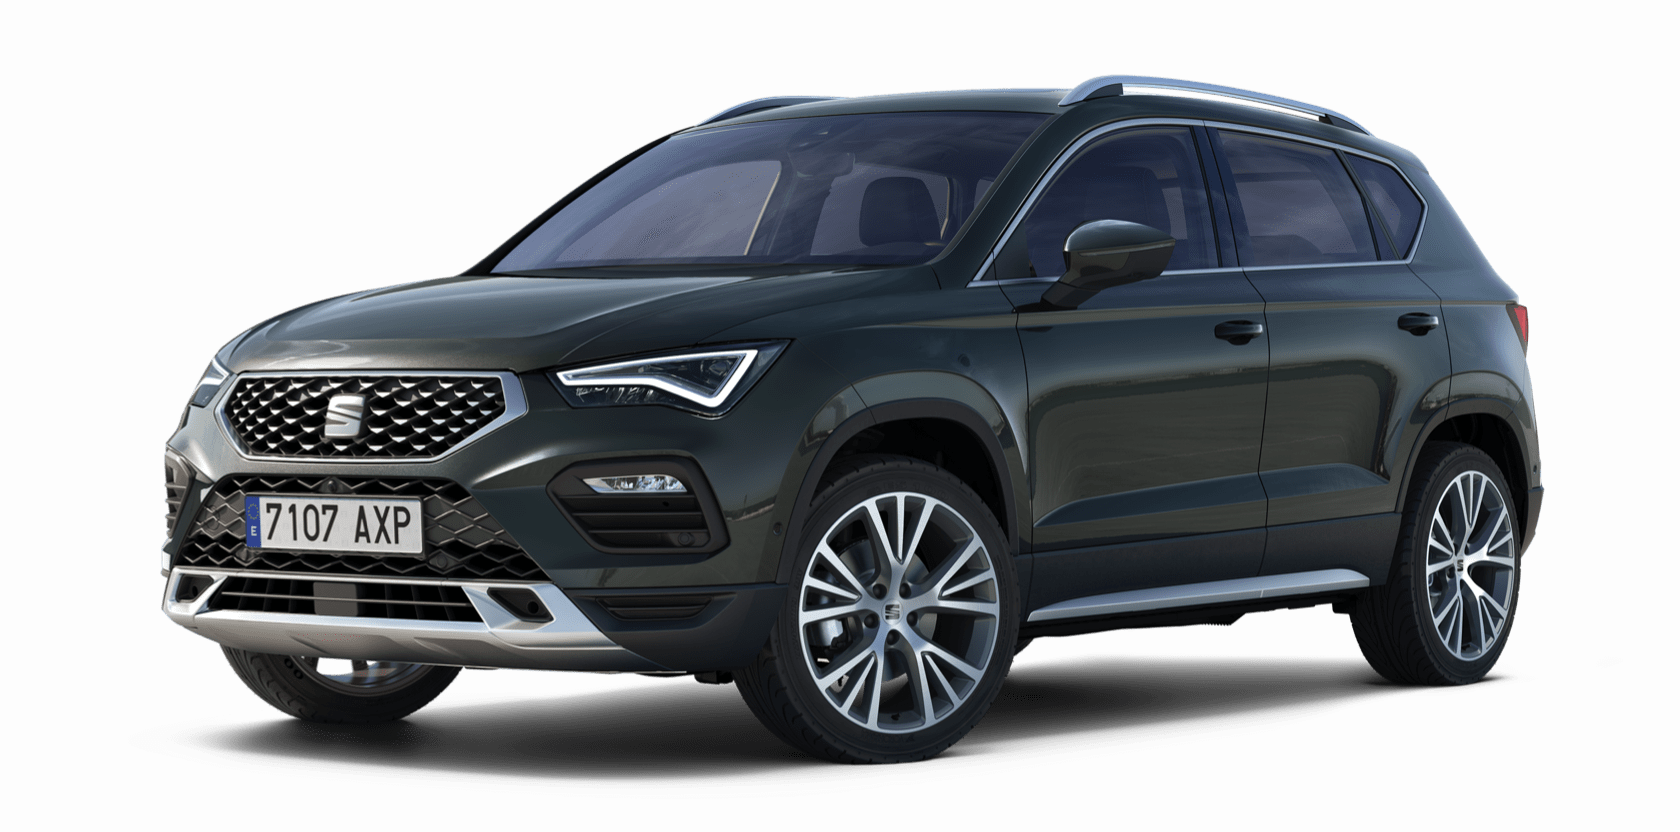 1708950188_new-seat-ateca-xperience-trim-dark-camouflage-colour.png